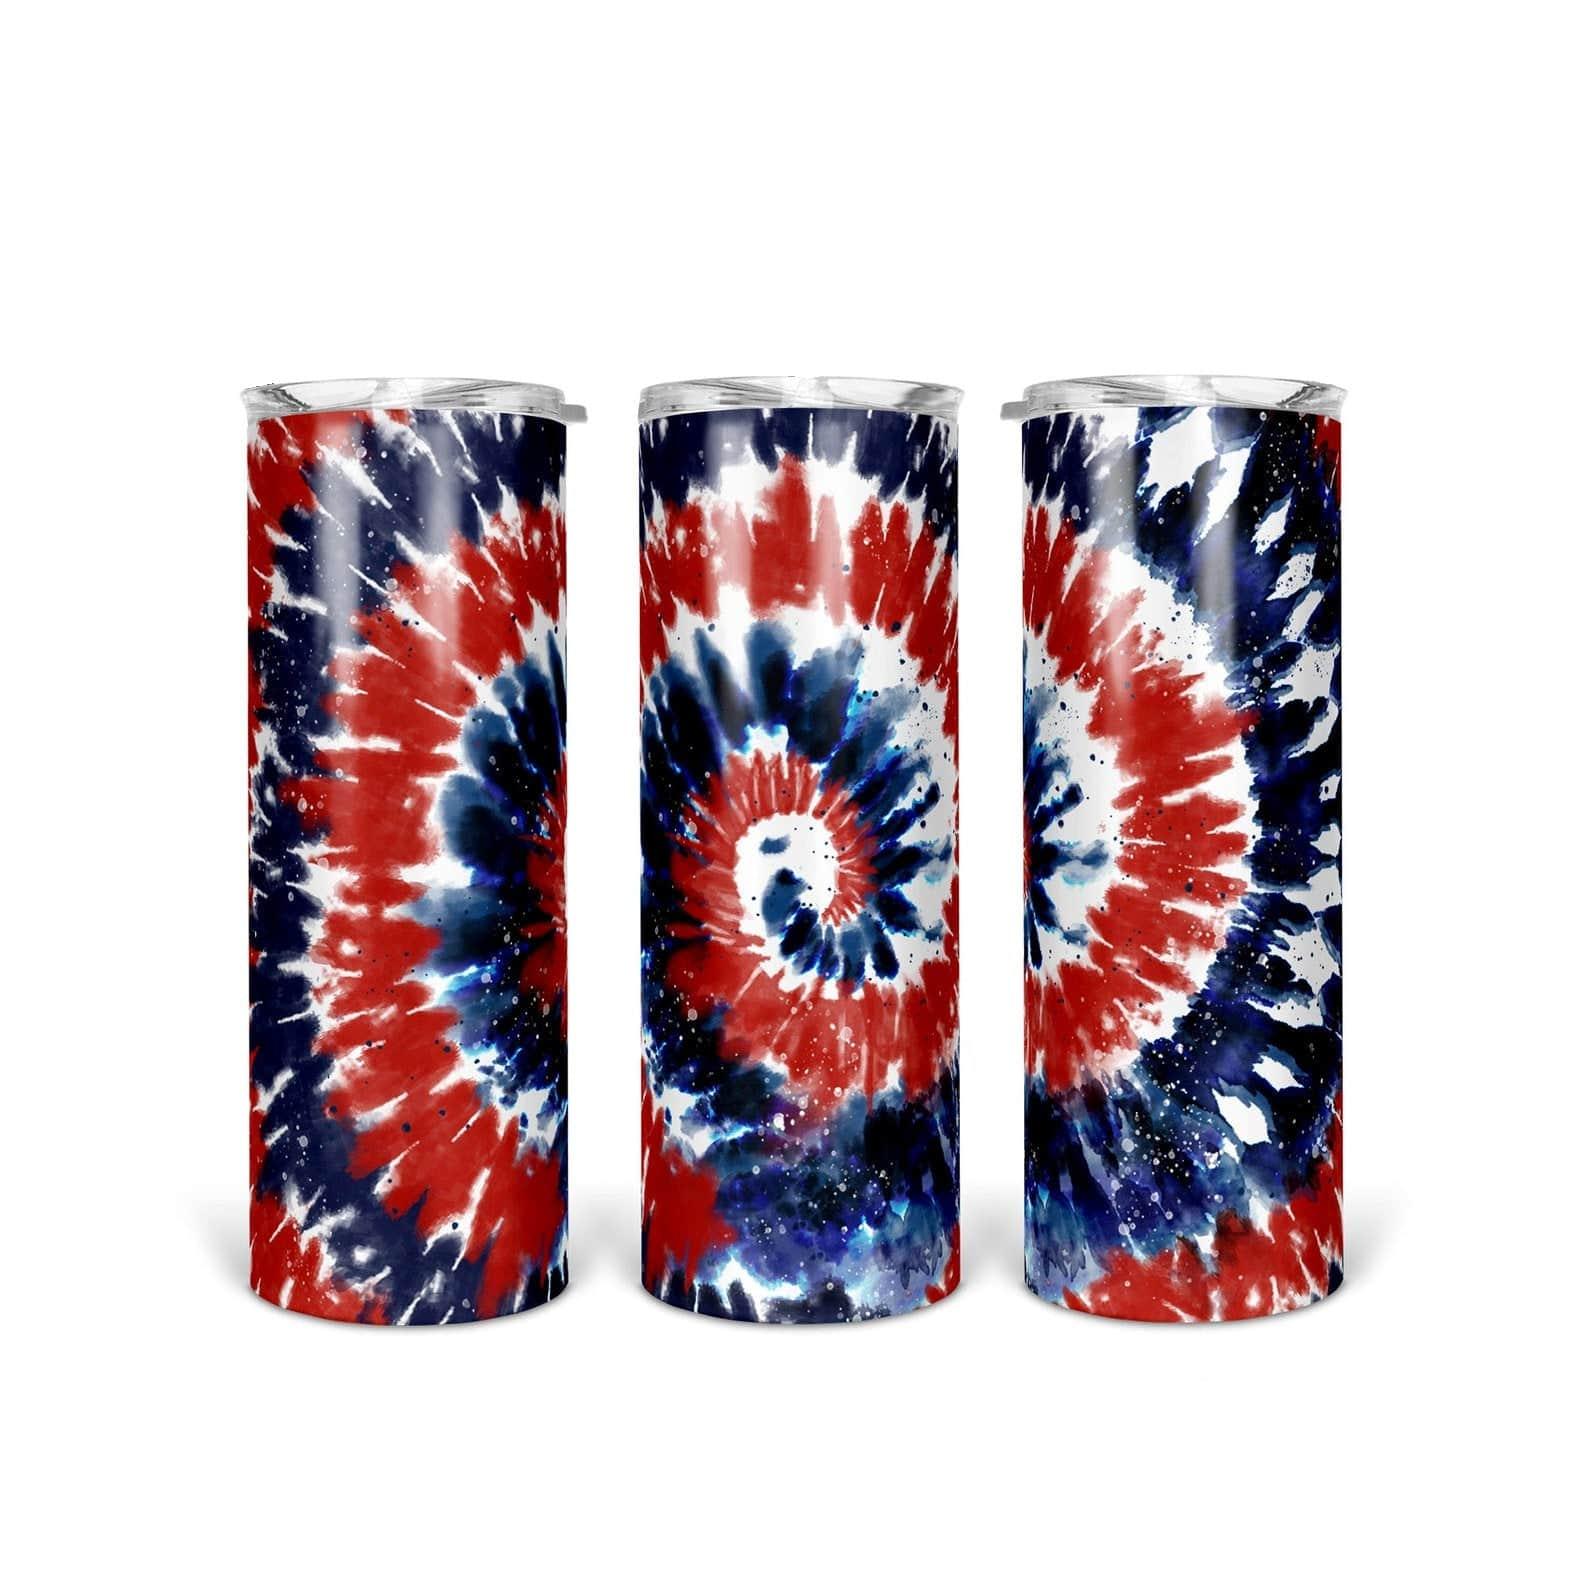 Patriotic Red, White & Blue Tie Dye 30 oz. Straight Skinny Tumbler by SSC Designs - Scrapbook Supply Companies